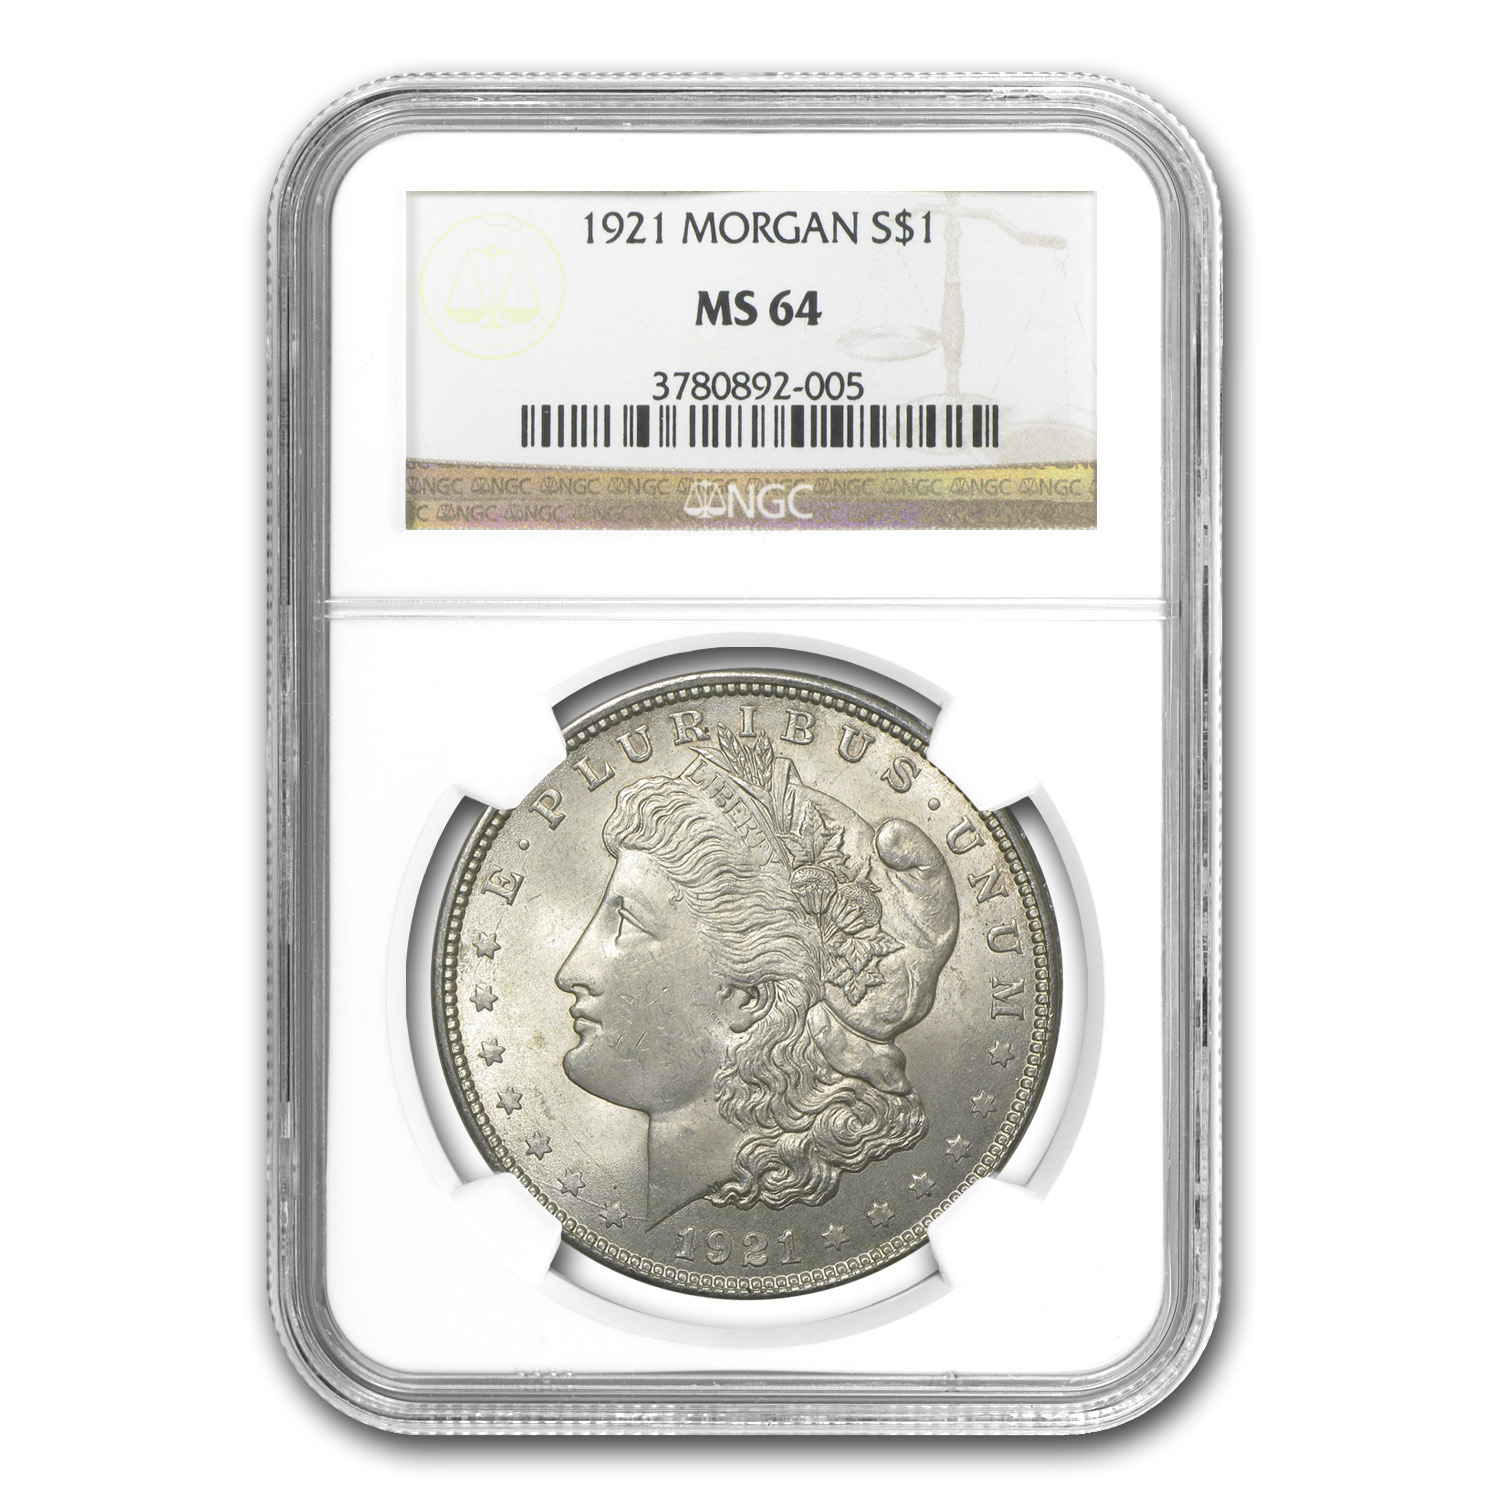 Shop this 1921 Morgan Dollar MS-64 NGC graded coin online